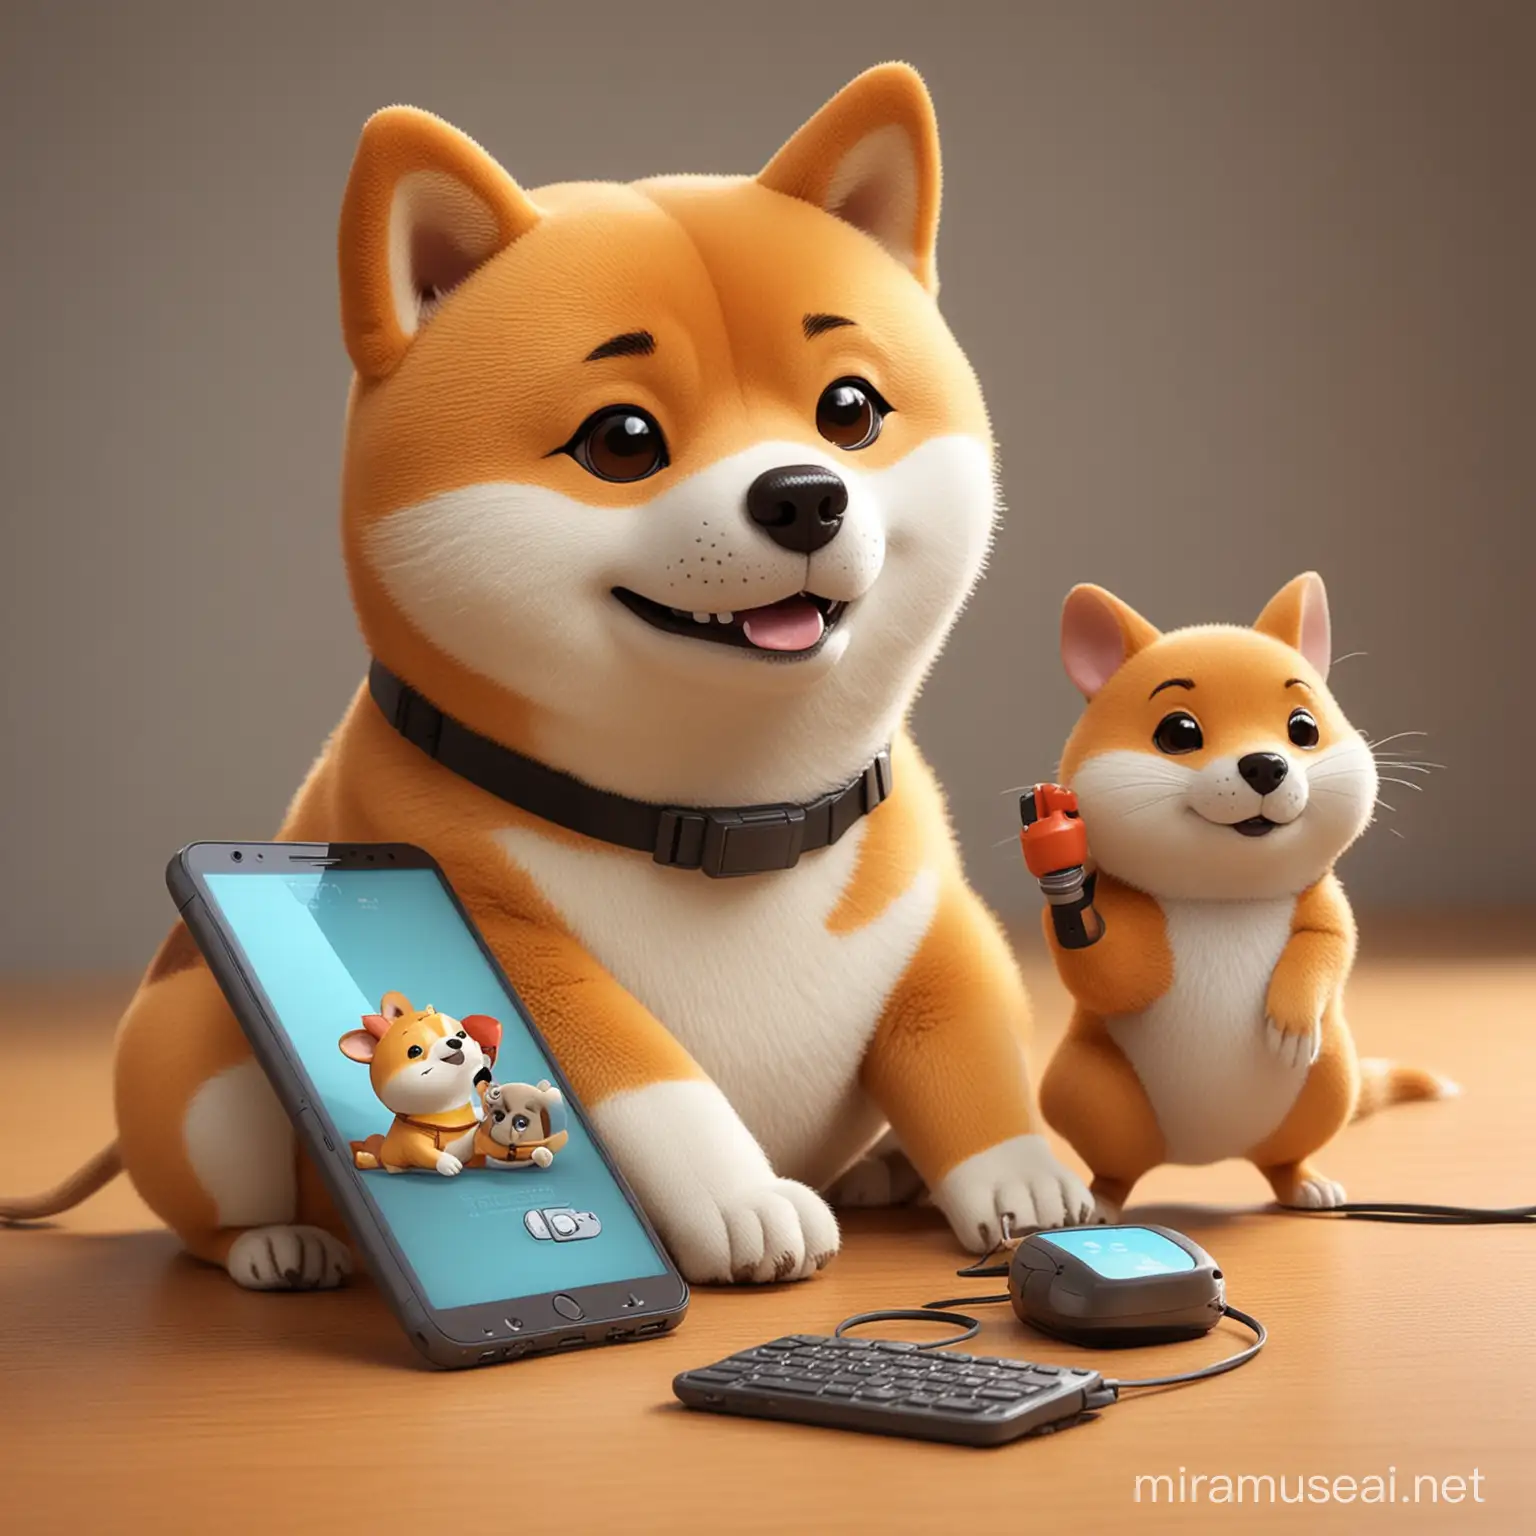 A cartoon shiba dog and mouse who are best friends the dog has his arm round the mouse and they hold mysterious electronic devices in their hands